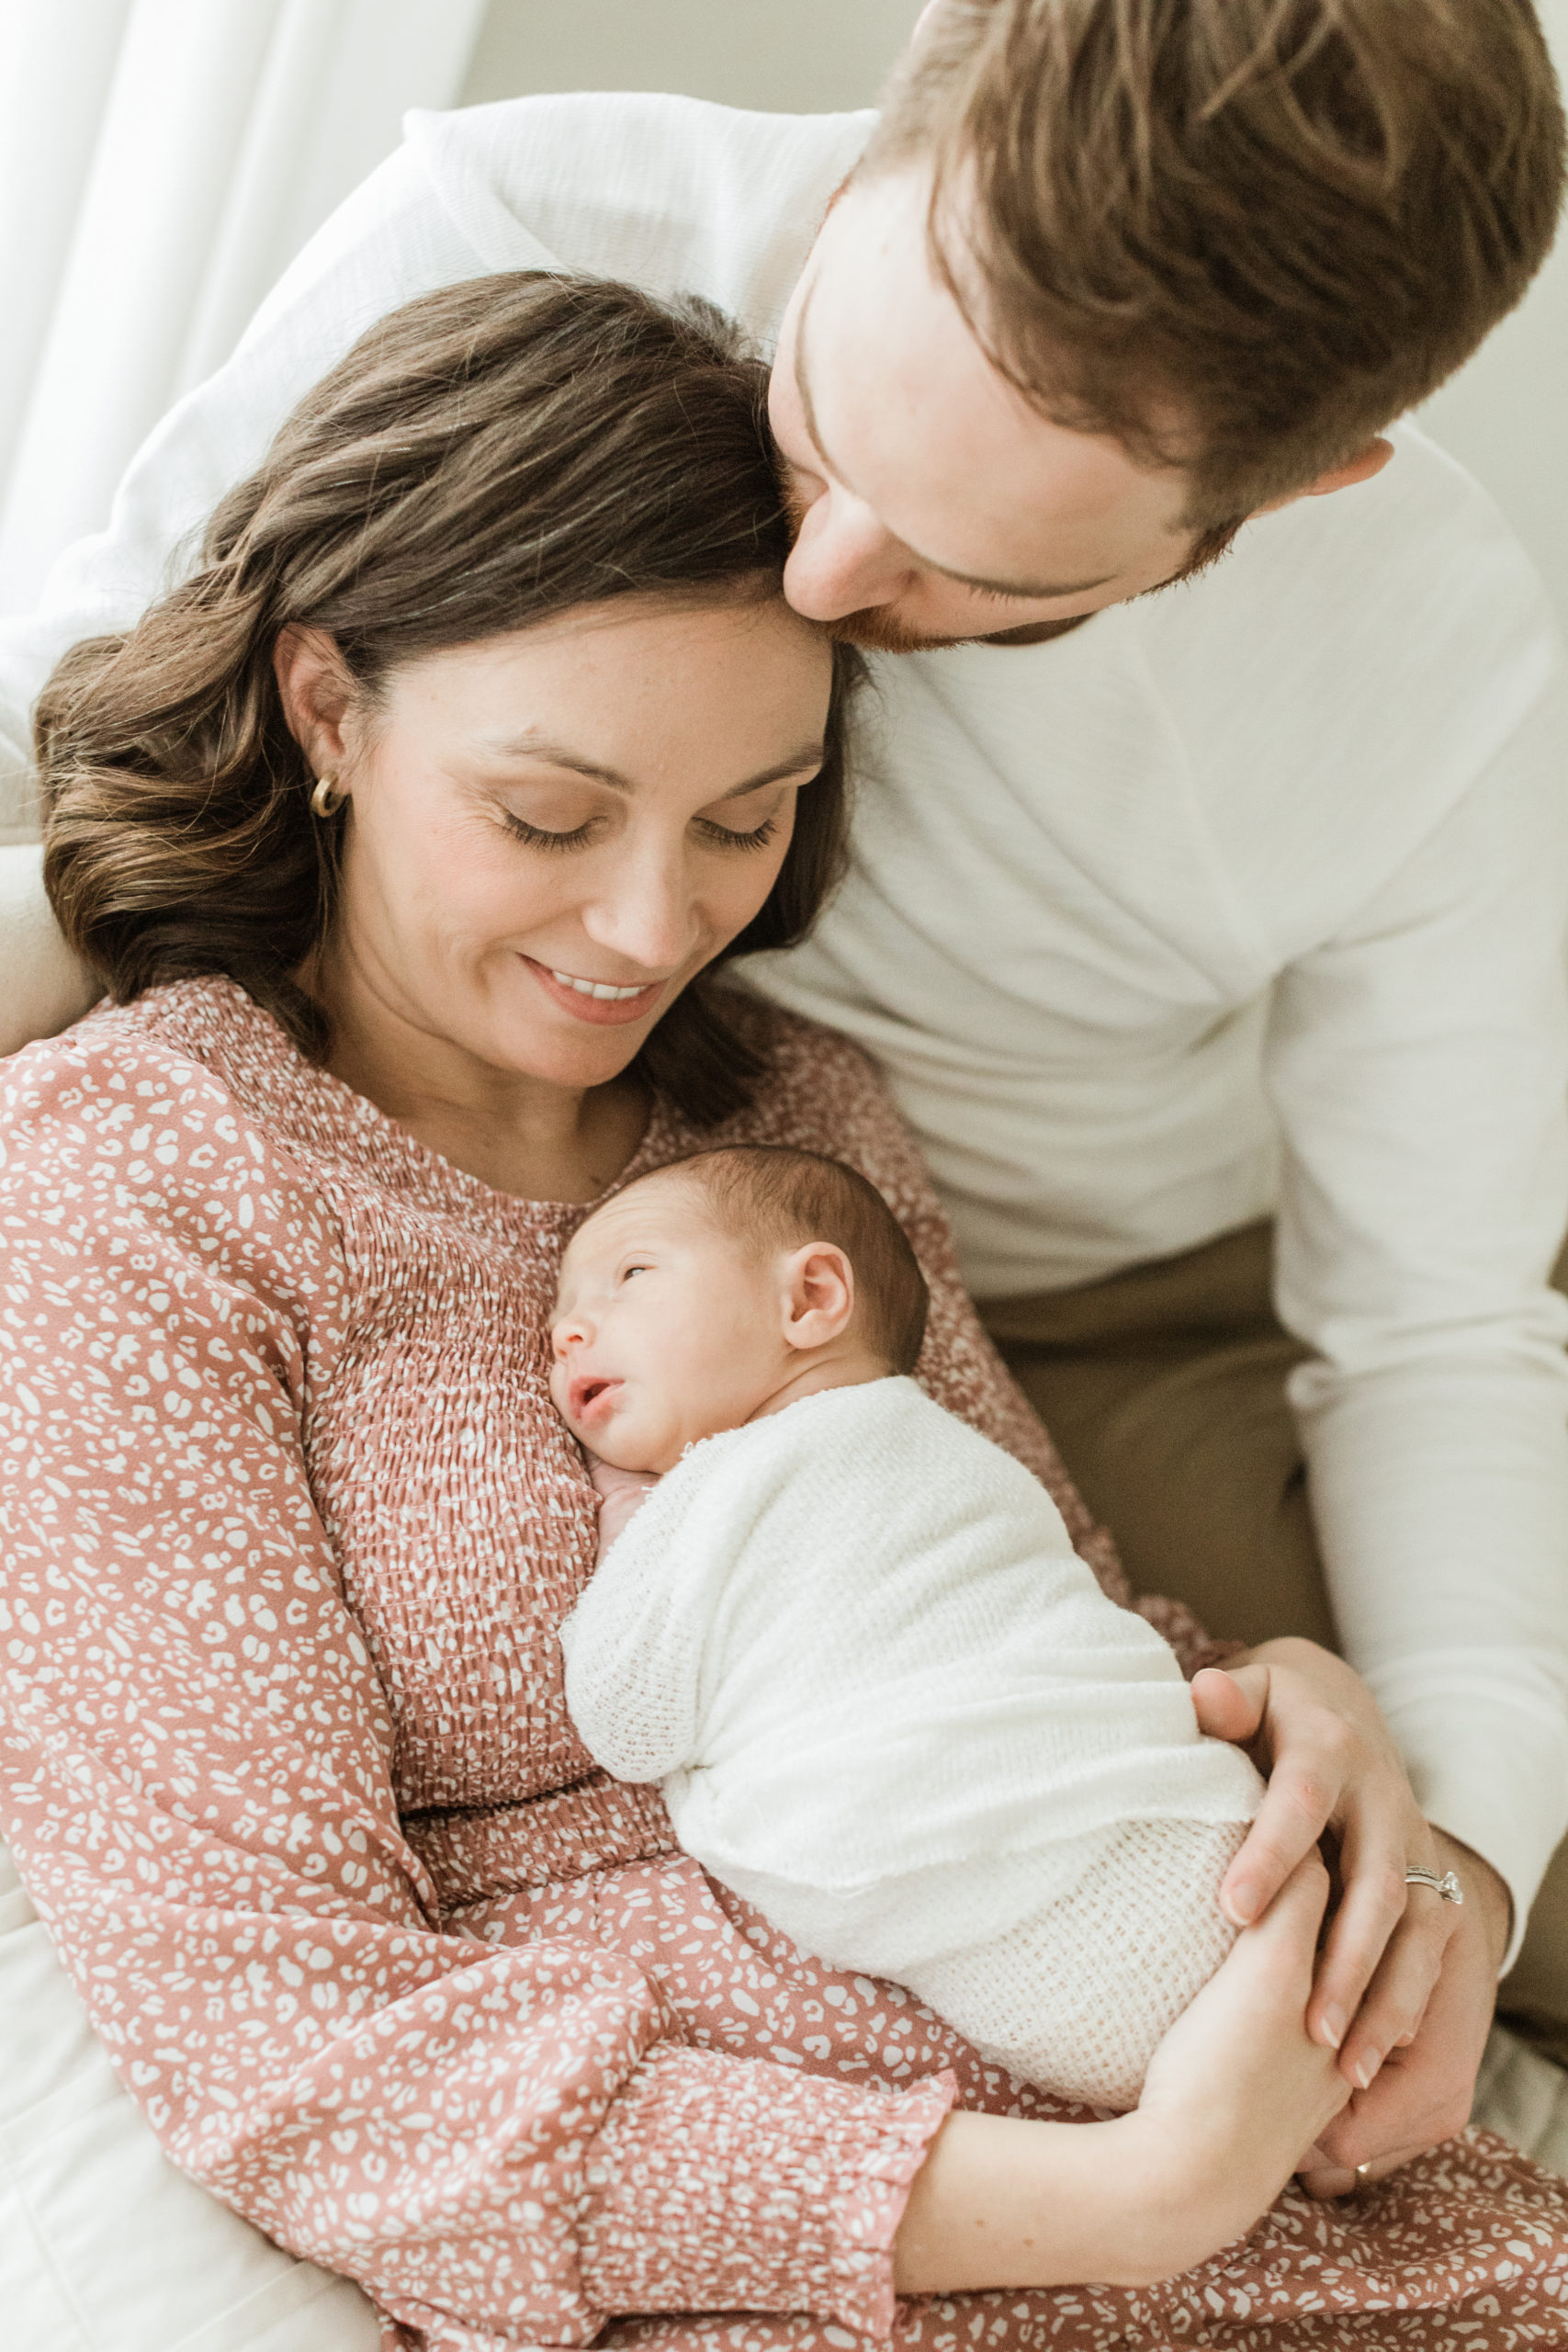 Mama and dad with their newborn daughter.mama in pink and white leopard printed dress holding her baby girl wrapped in white blanket on her chest. Dad wearing cream long sleeve and khaki pants. Dad kissing wife's forehead.